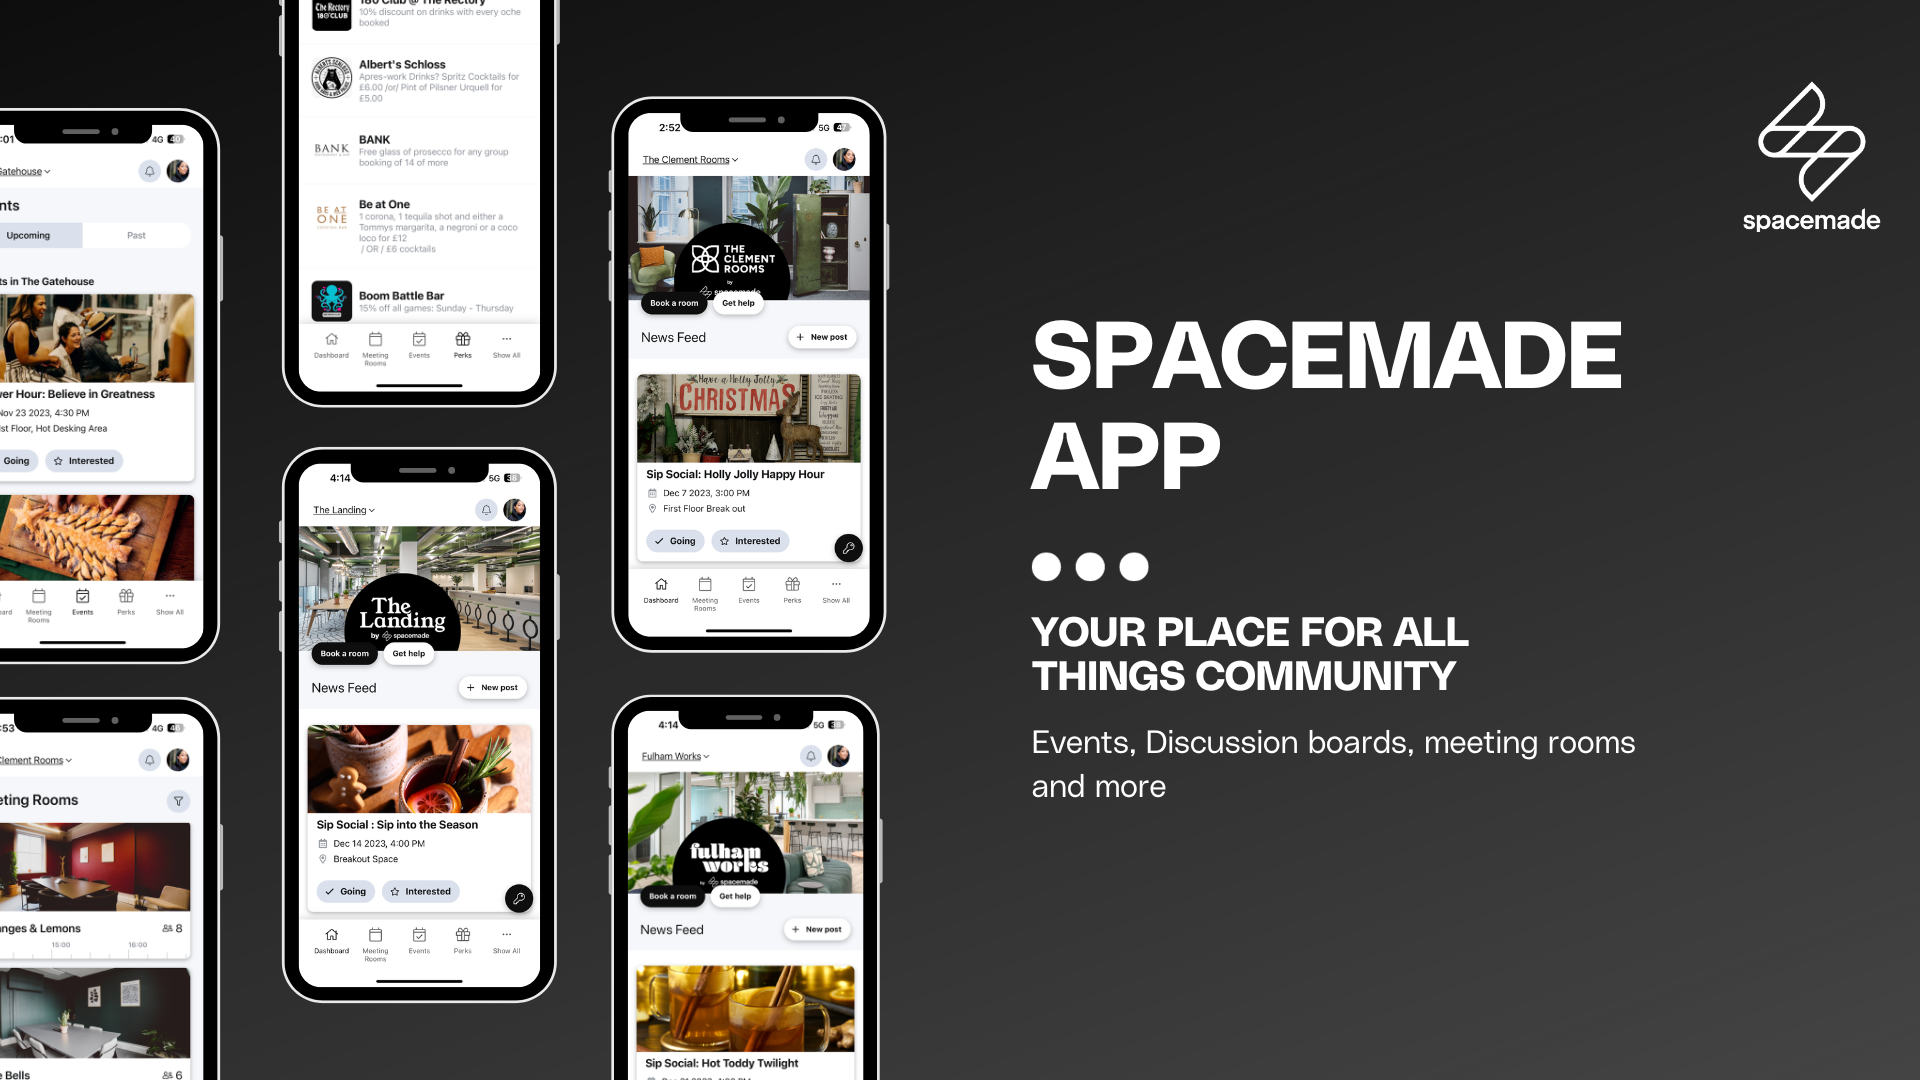 Copy of Spacemade app